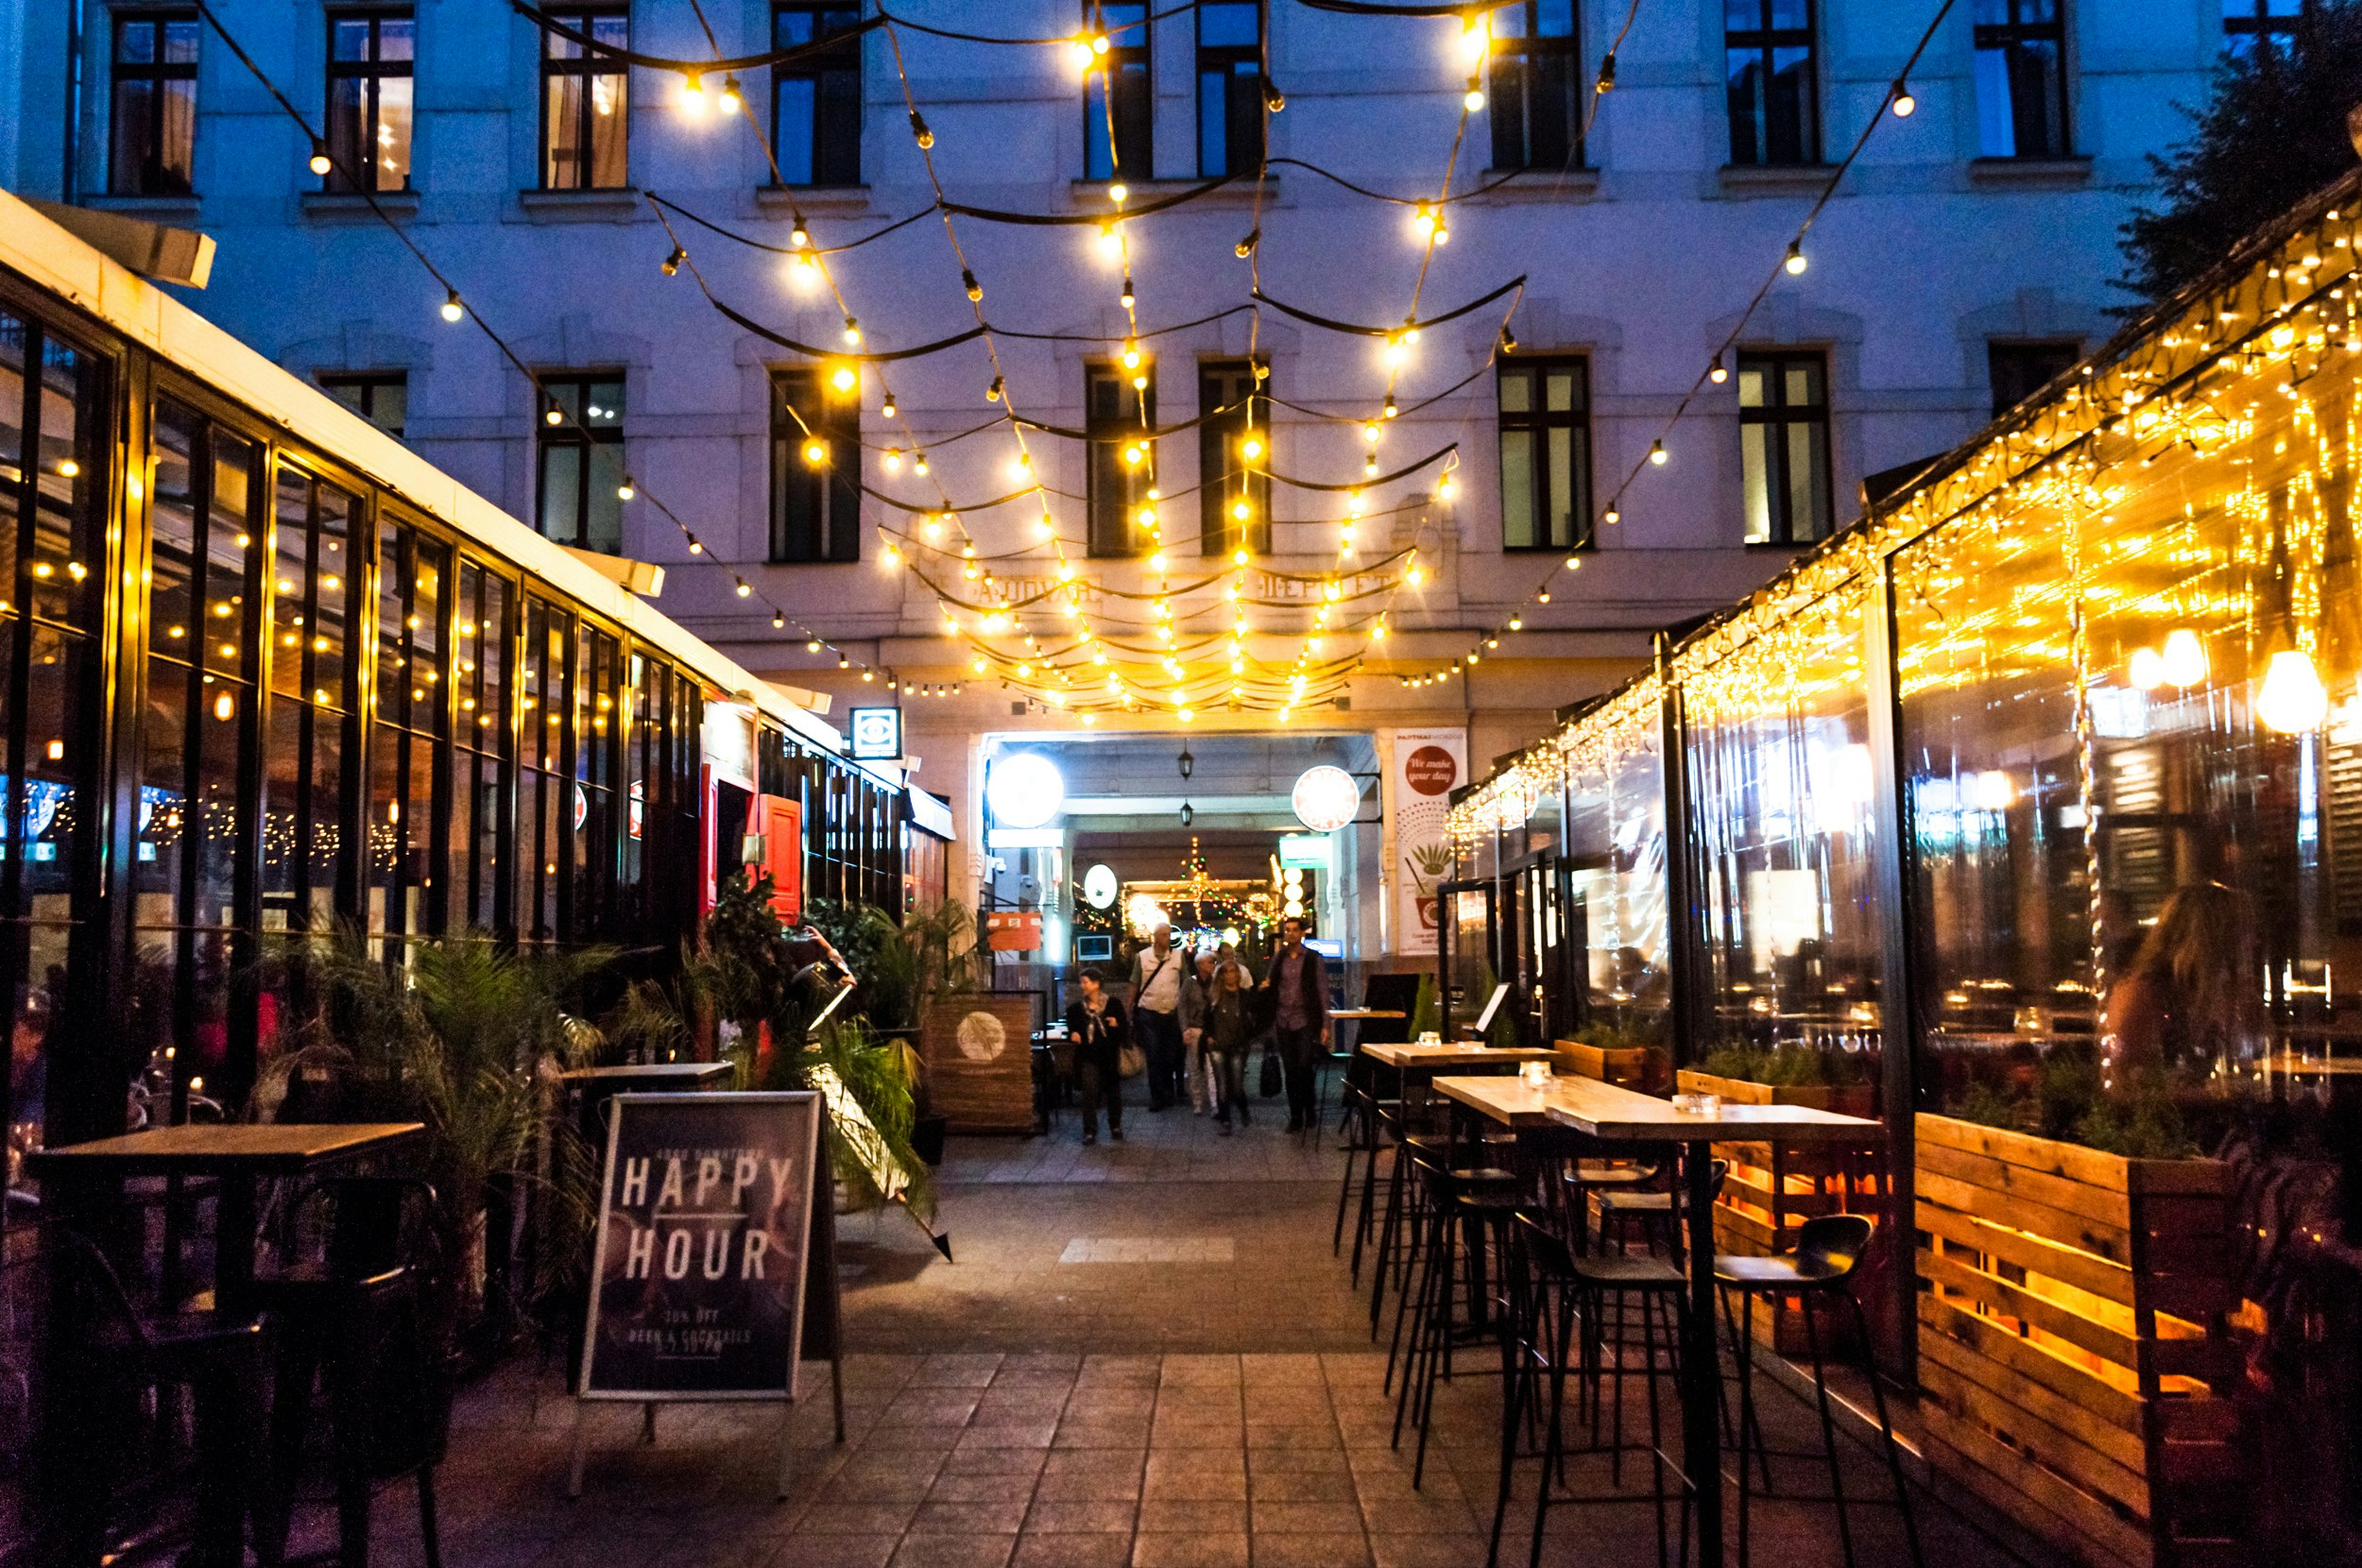 A passageway between buildings lined with string lights. A bar on the left has a Happy Hour sign outside it. Tables and stools line the passage.